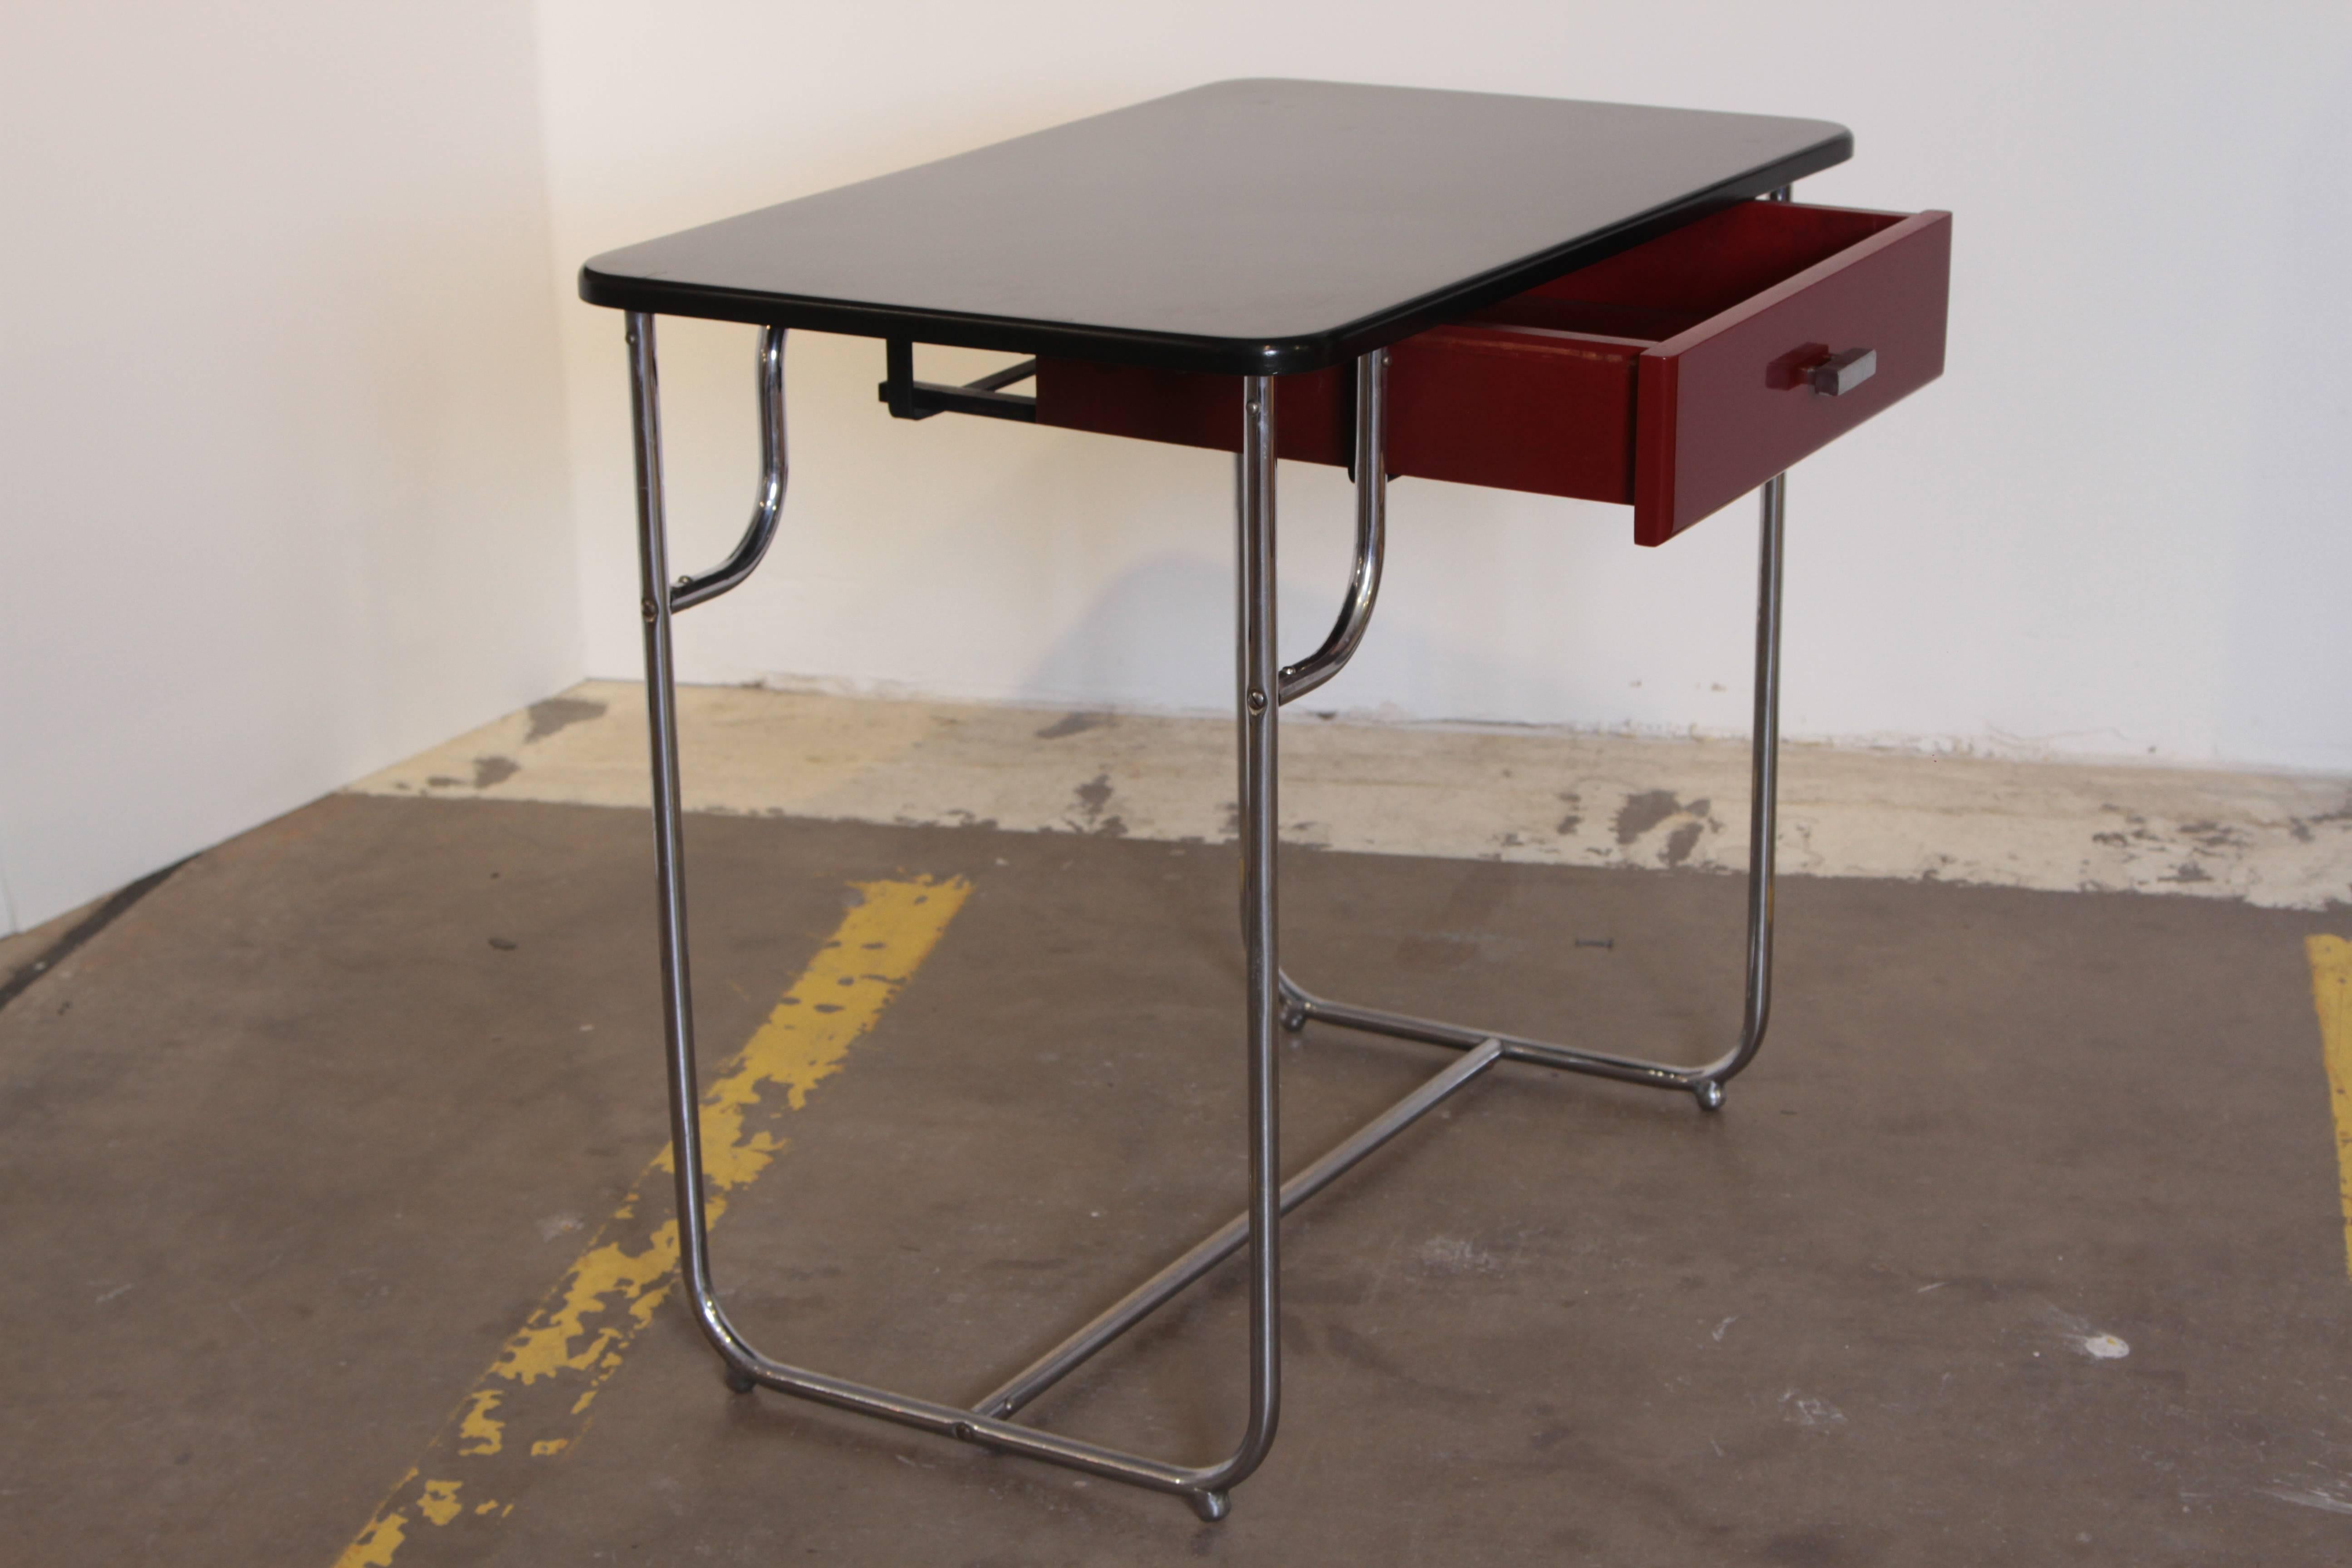 Machine Age Art Deco Lloyd Chromium Furniture Desk Set, Two Desks / Two Chairs In Good Condition For Sale In Dallas, TX